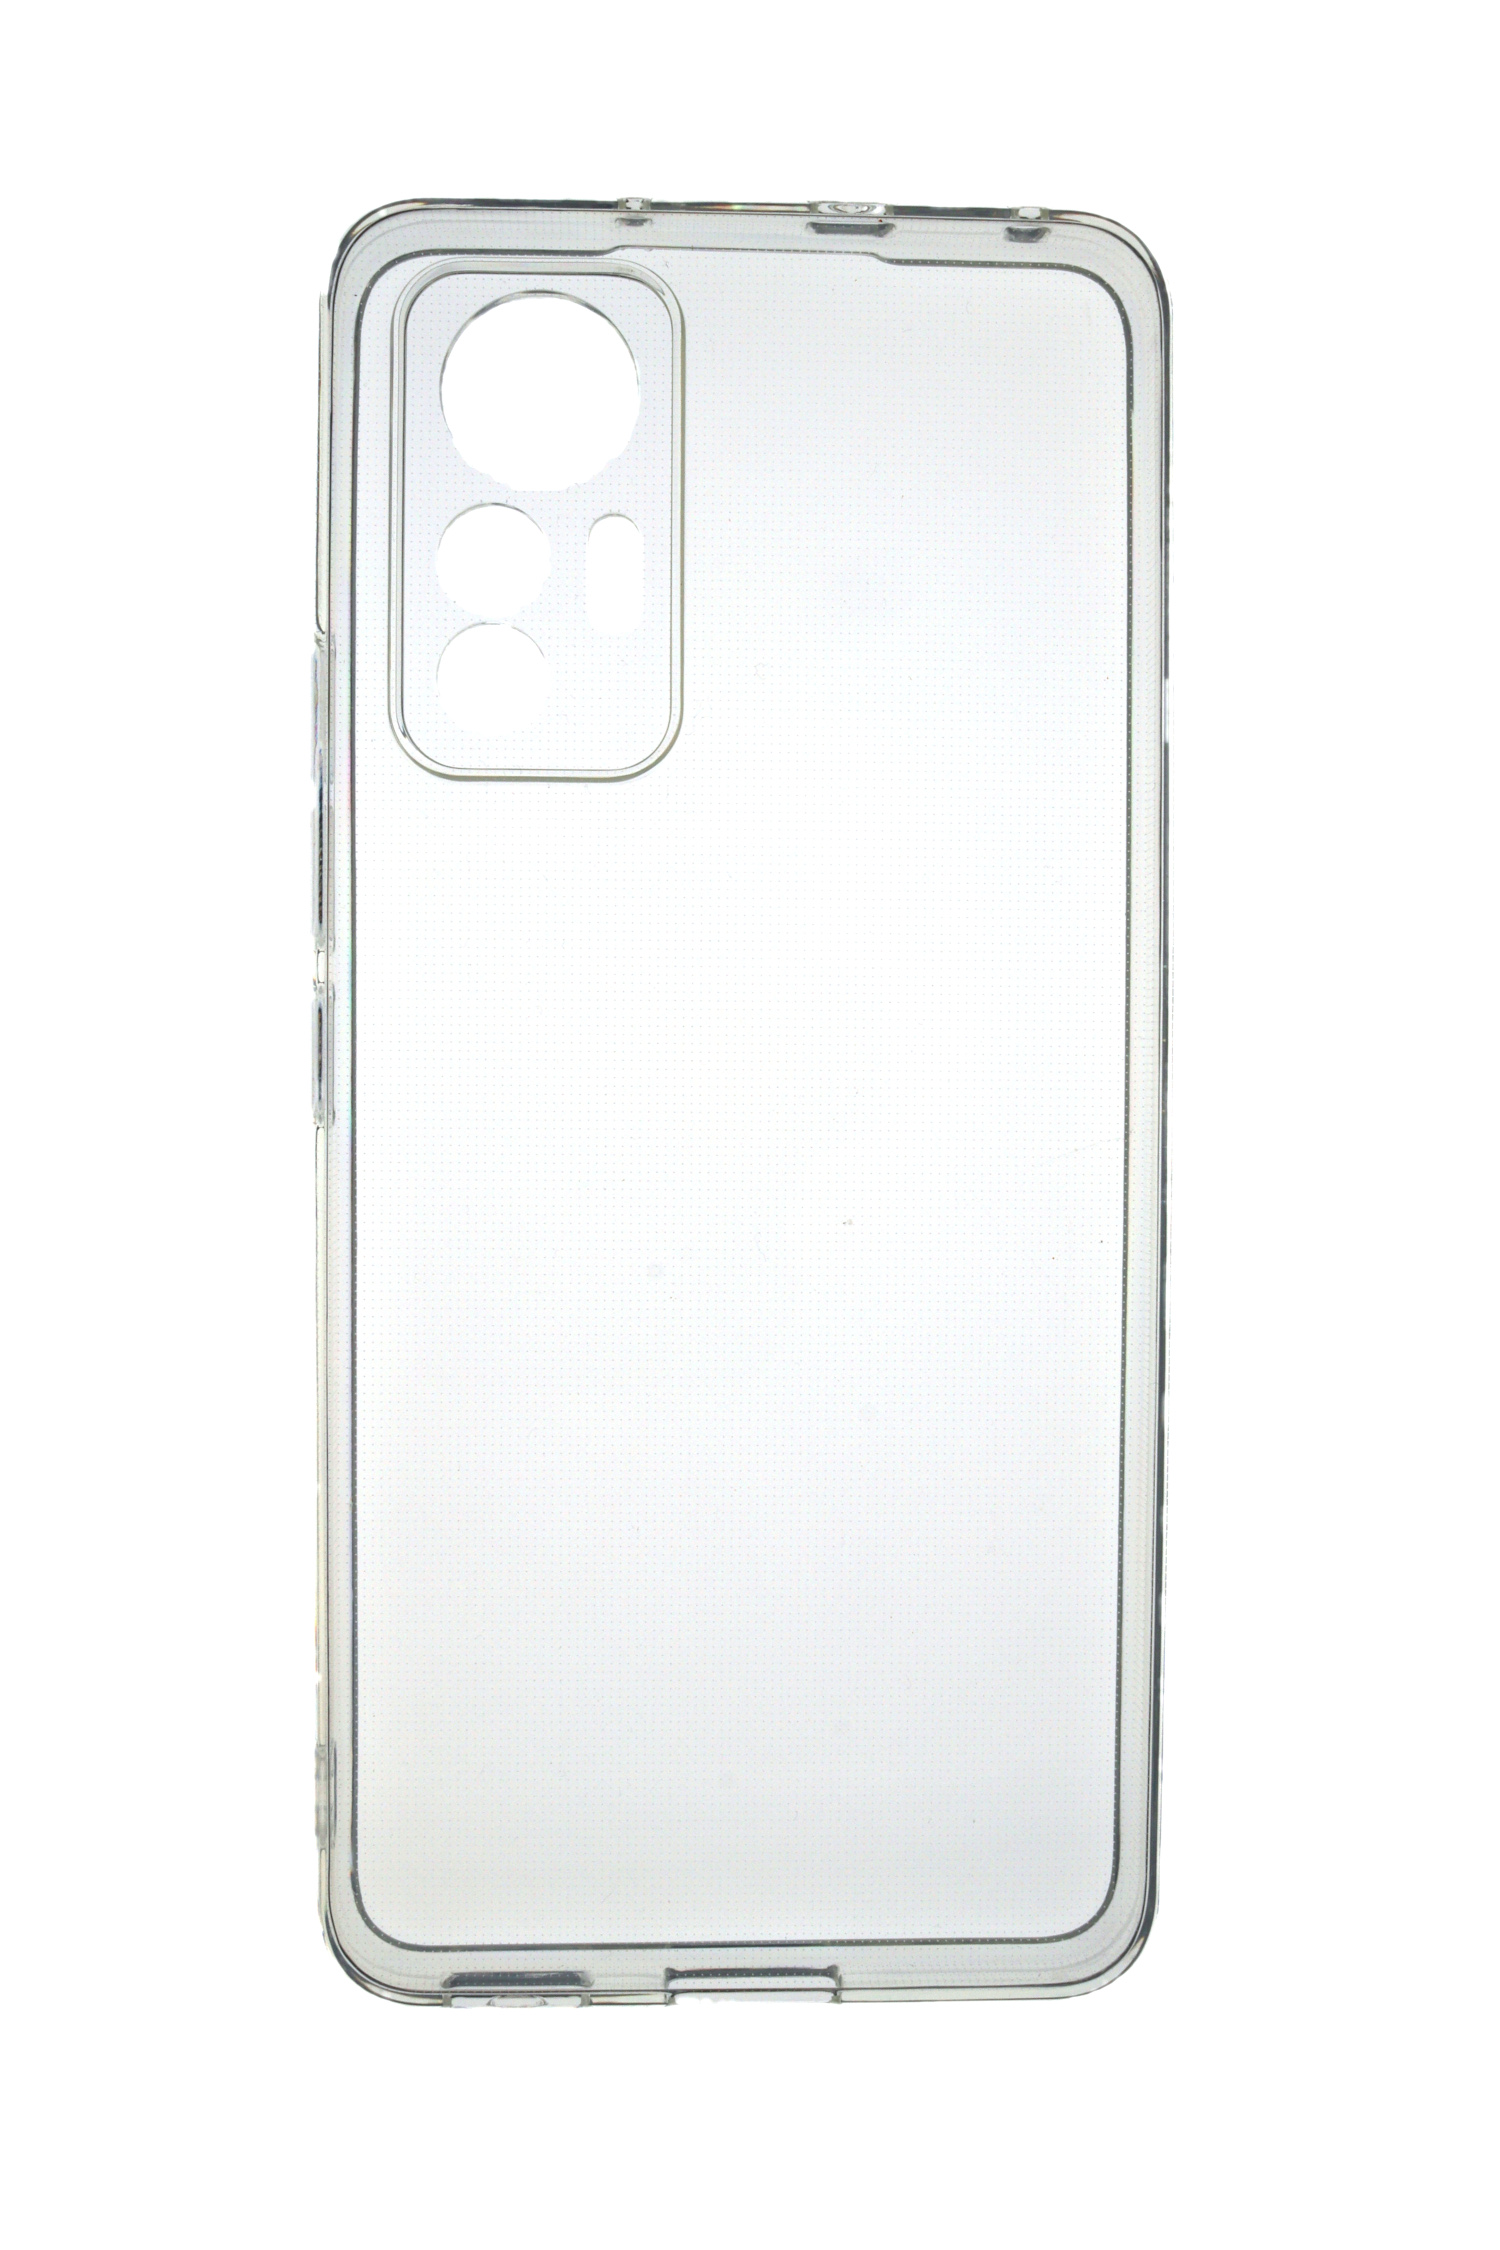 TPU Xiaomi, Strong, mm Lite, 12 Case Transparent Backcover, 2.0 JAMCOVER